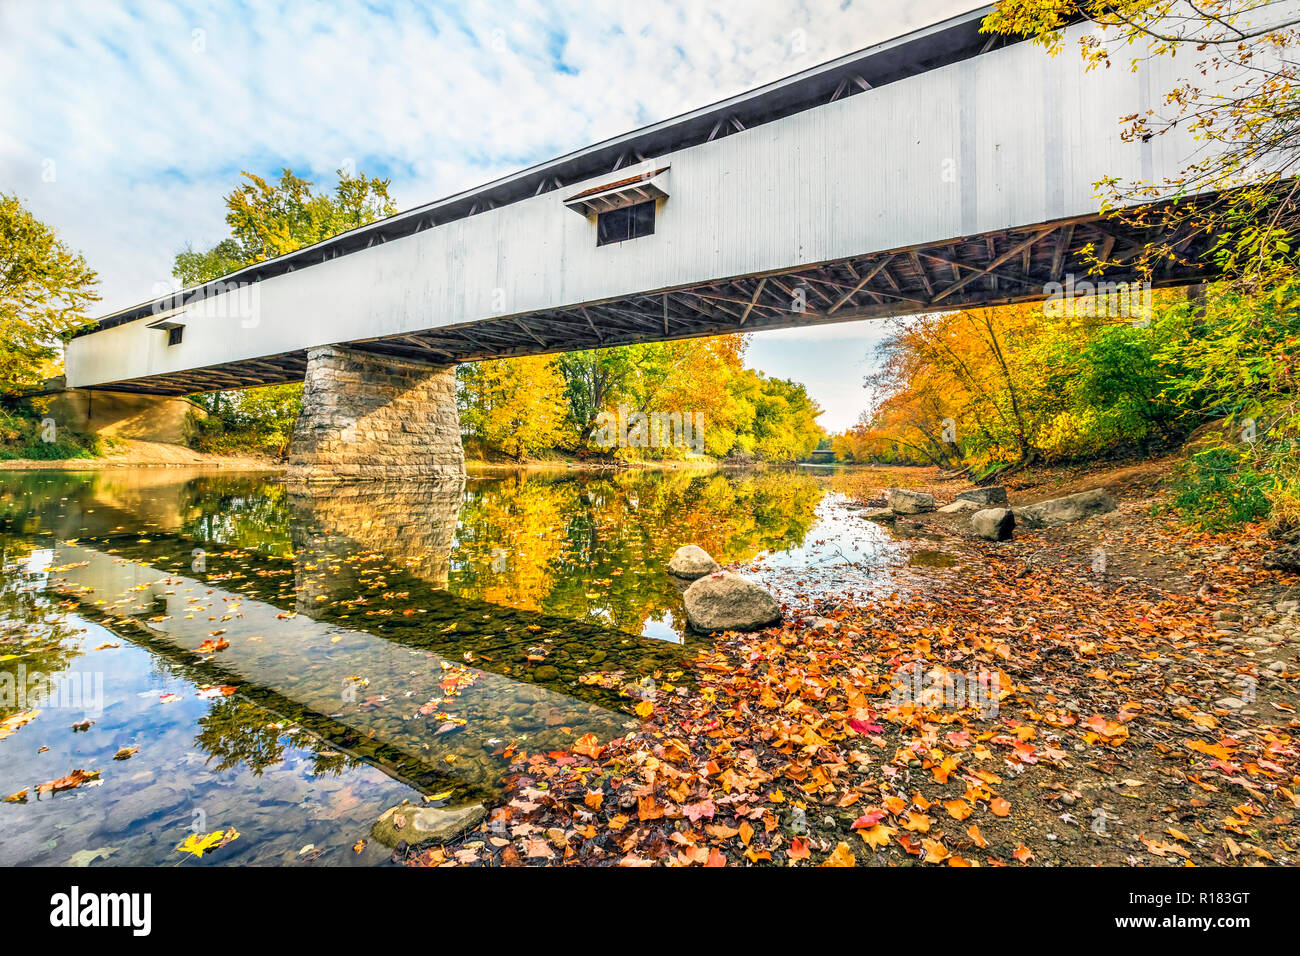 Potter's Covered Bridge crosses the West Fork of the White River surrounded by colorful fall foliage in Noblesville, Indiana. Stock Photo